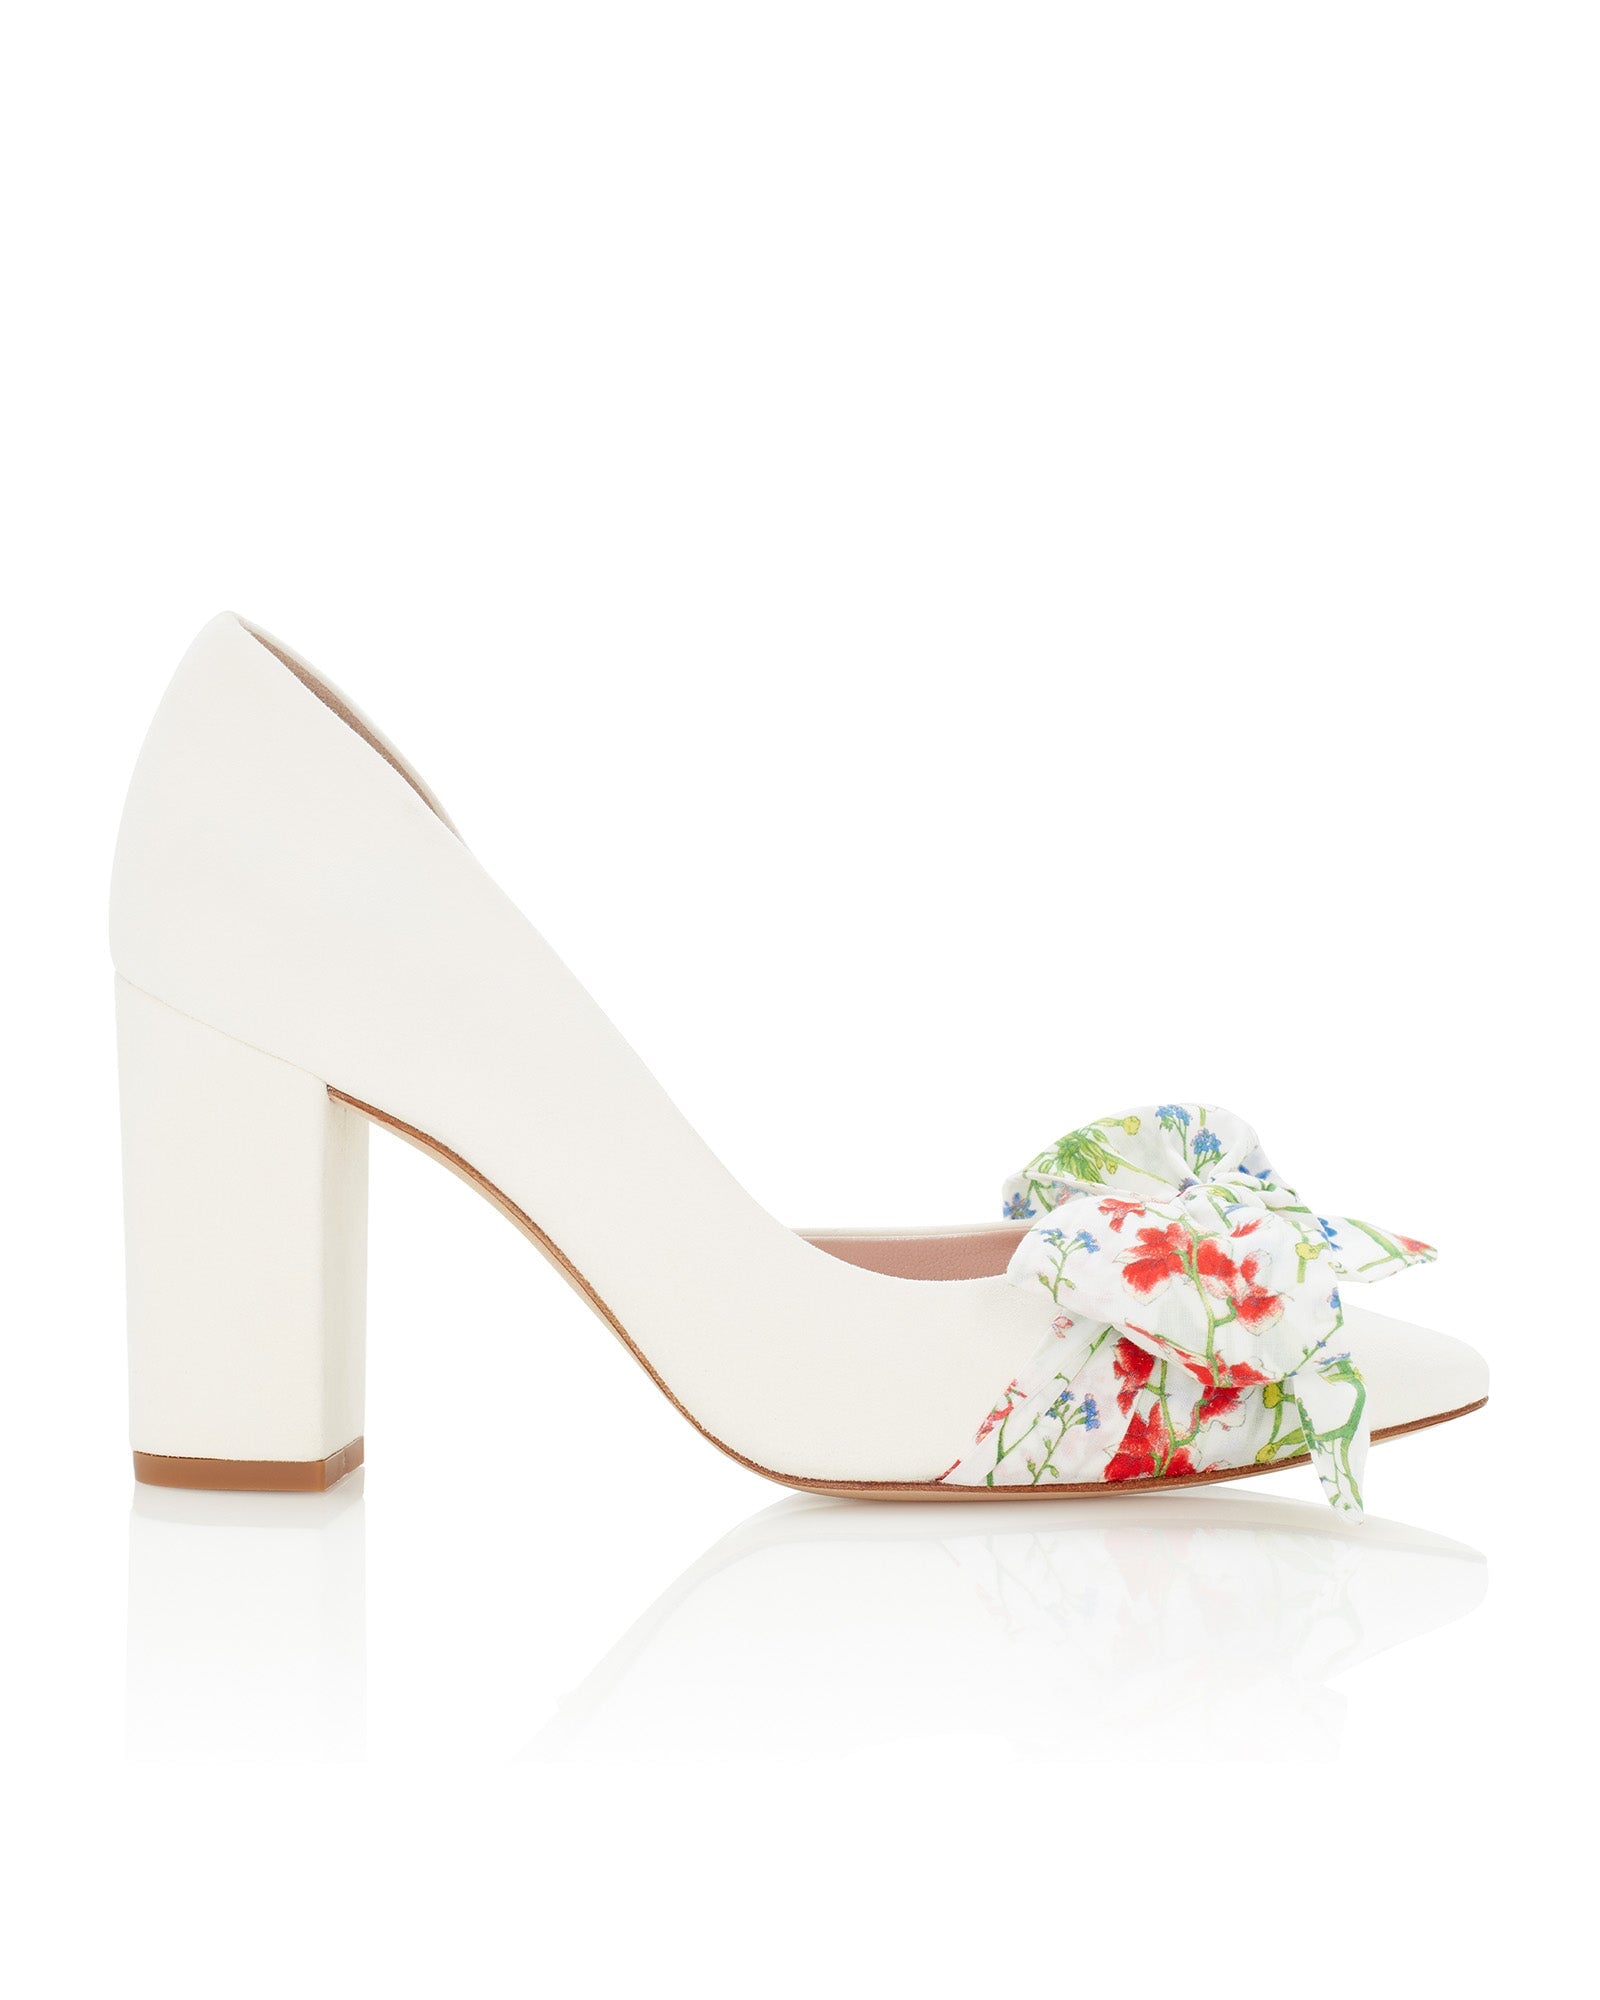 Florence Meadow Block Fashion Shoe Ivory Suede Shoes with Liberty Print Bow  image